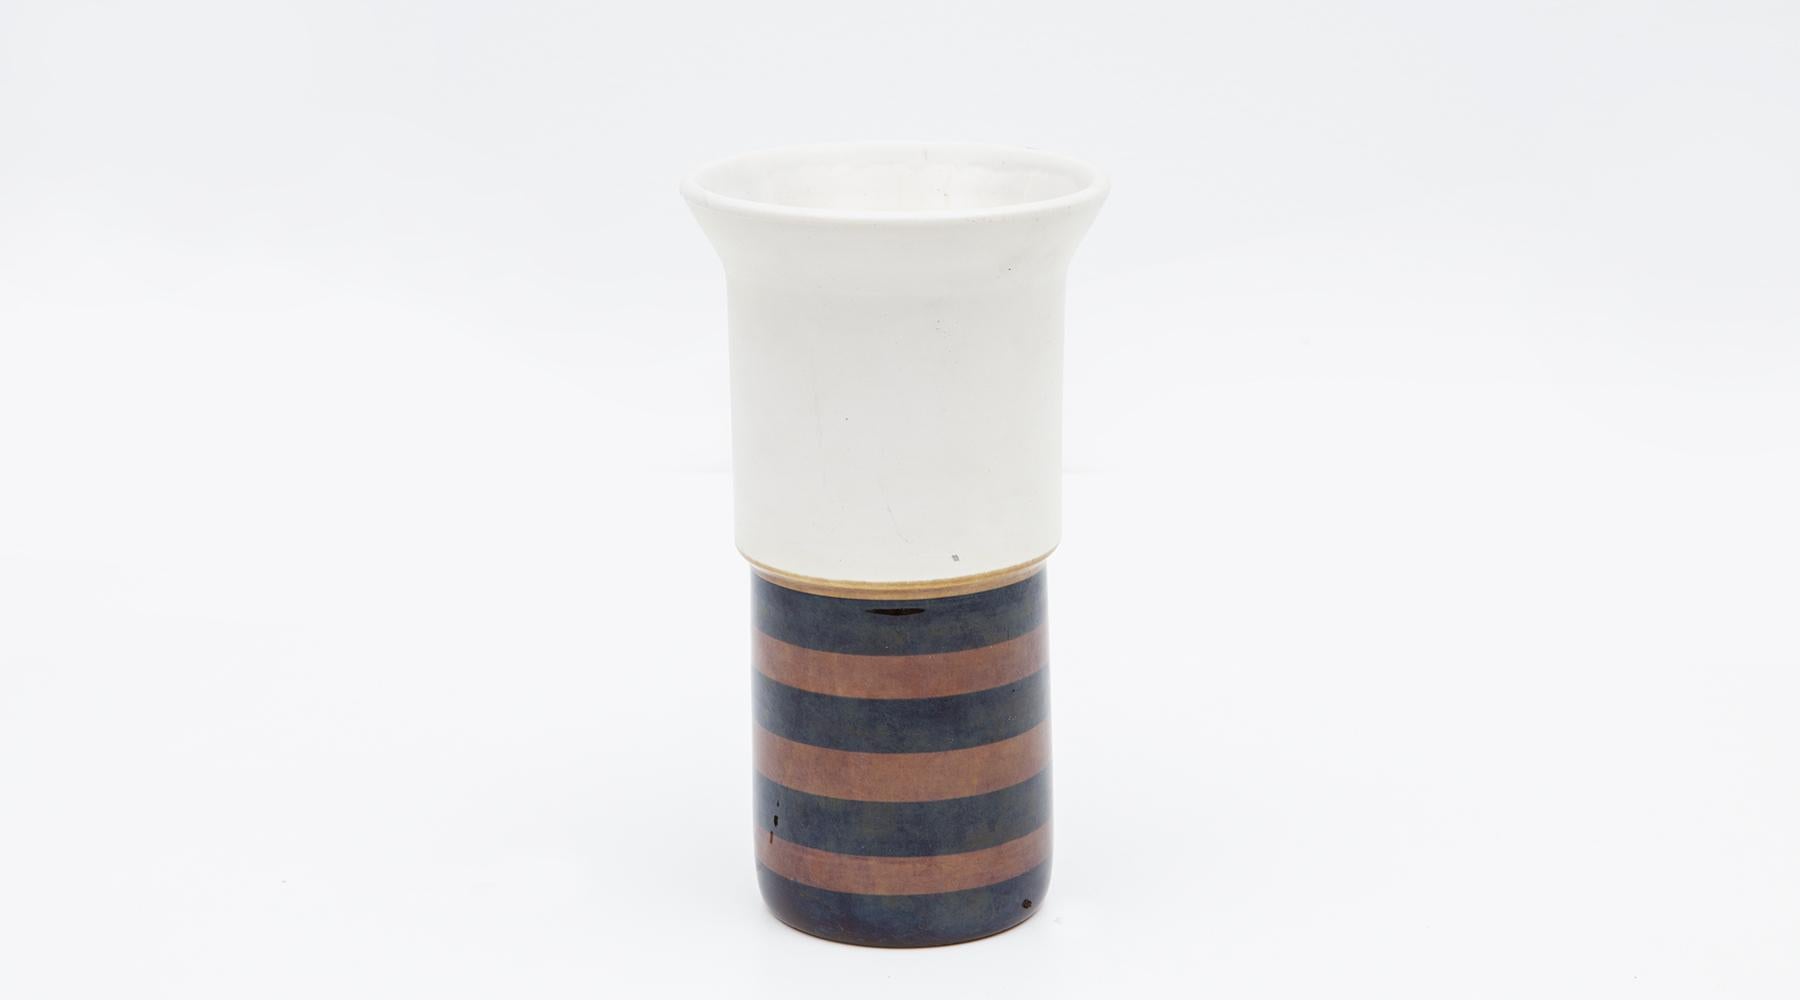 Vase by Ettore Sottsass in brown and white, Italy, 1959.

Nicely shaped ceramic vase designed by famous Italian Ettore Sottsass. He was an architect and designer of the late 20th century. His body of designs included furniture, jewelry, glass,